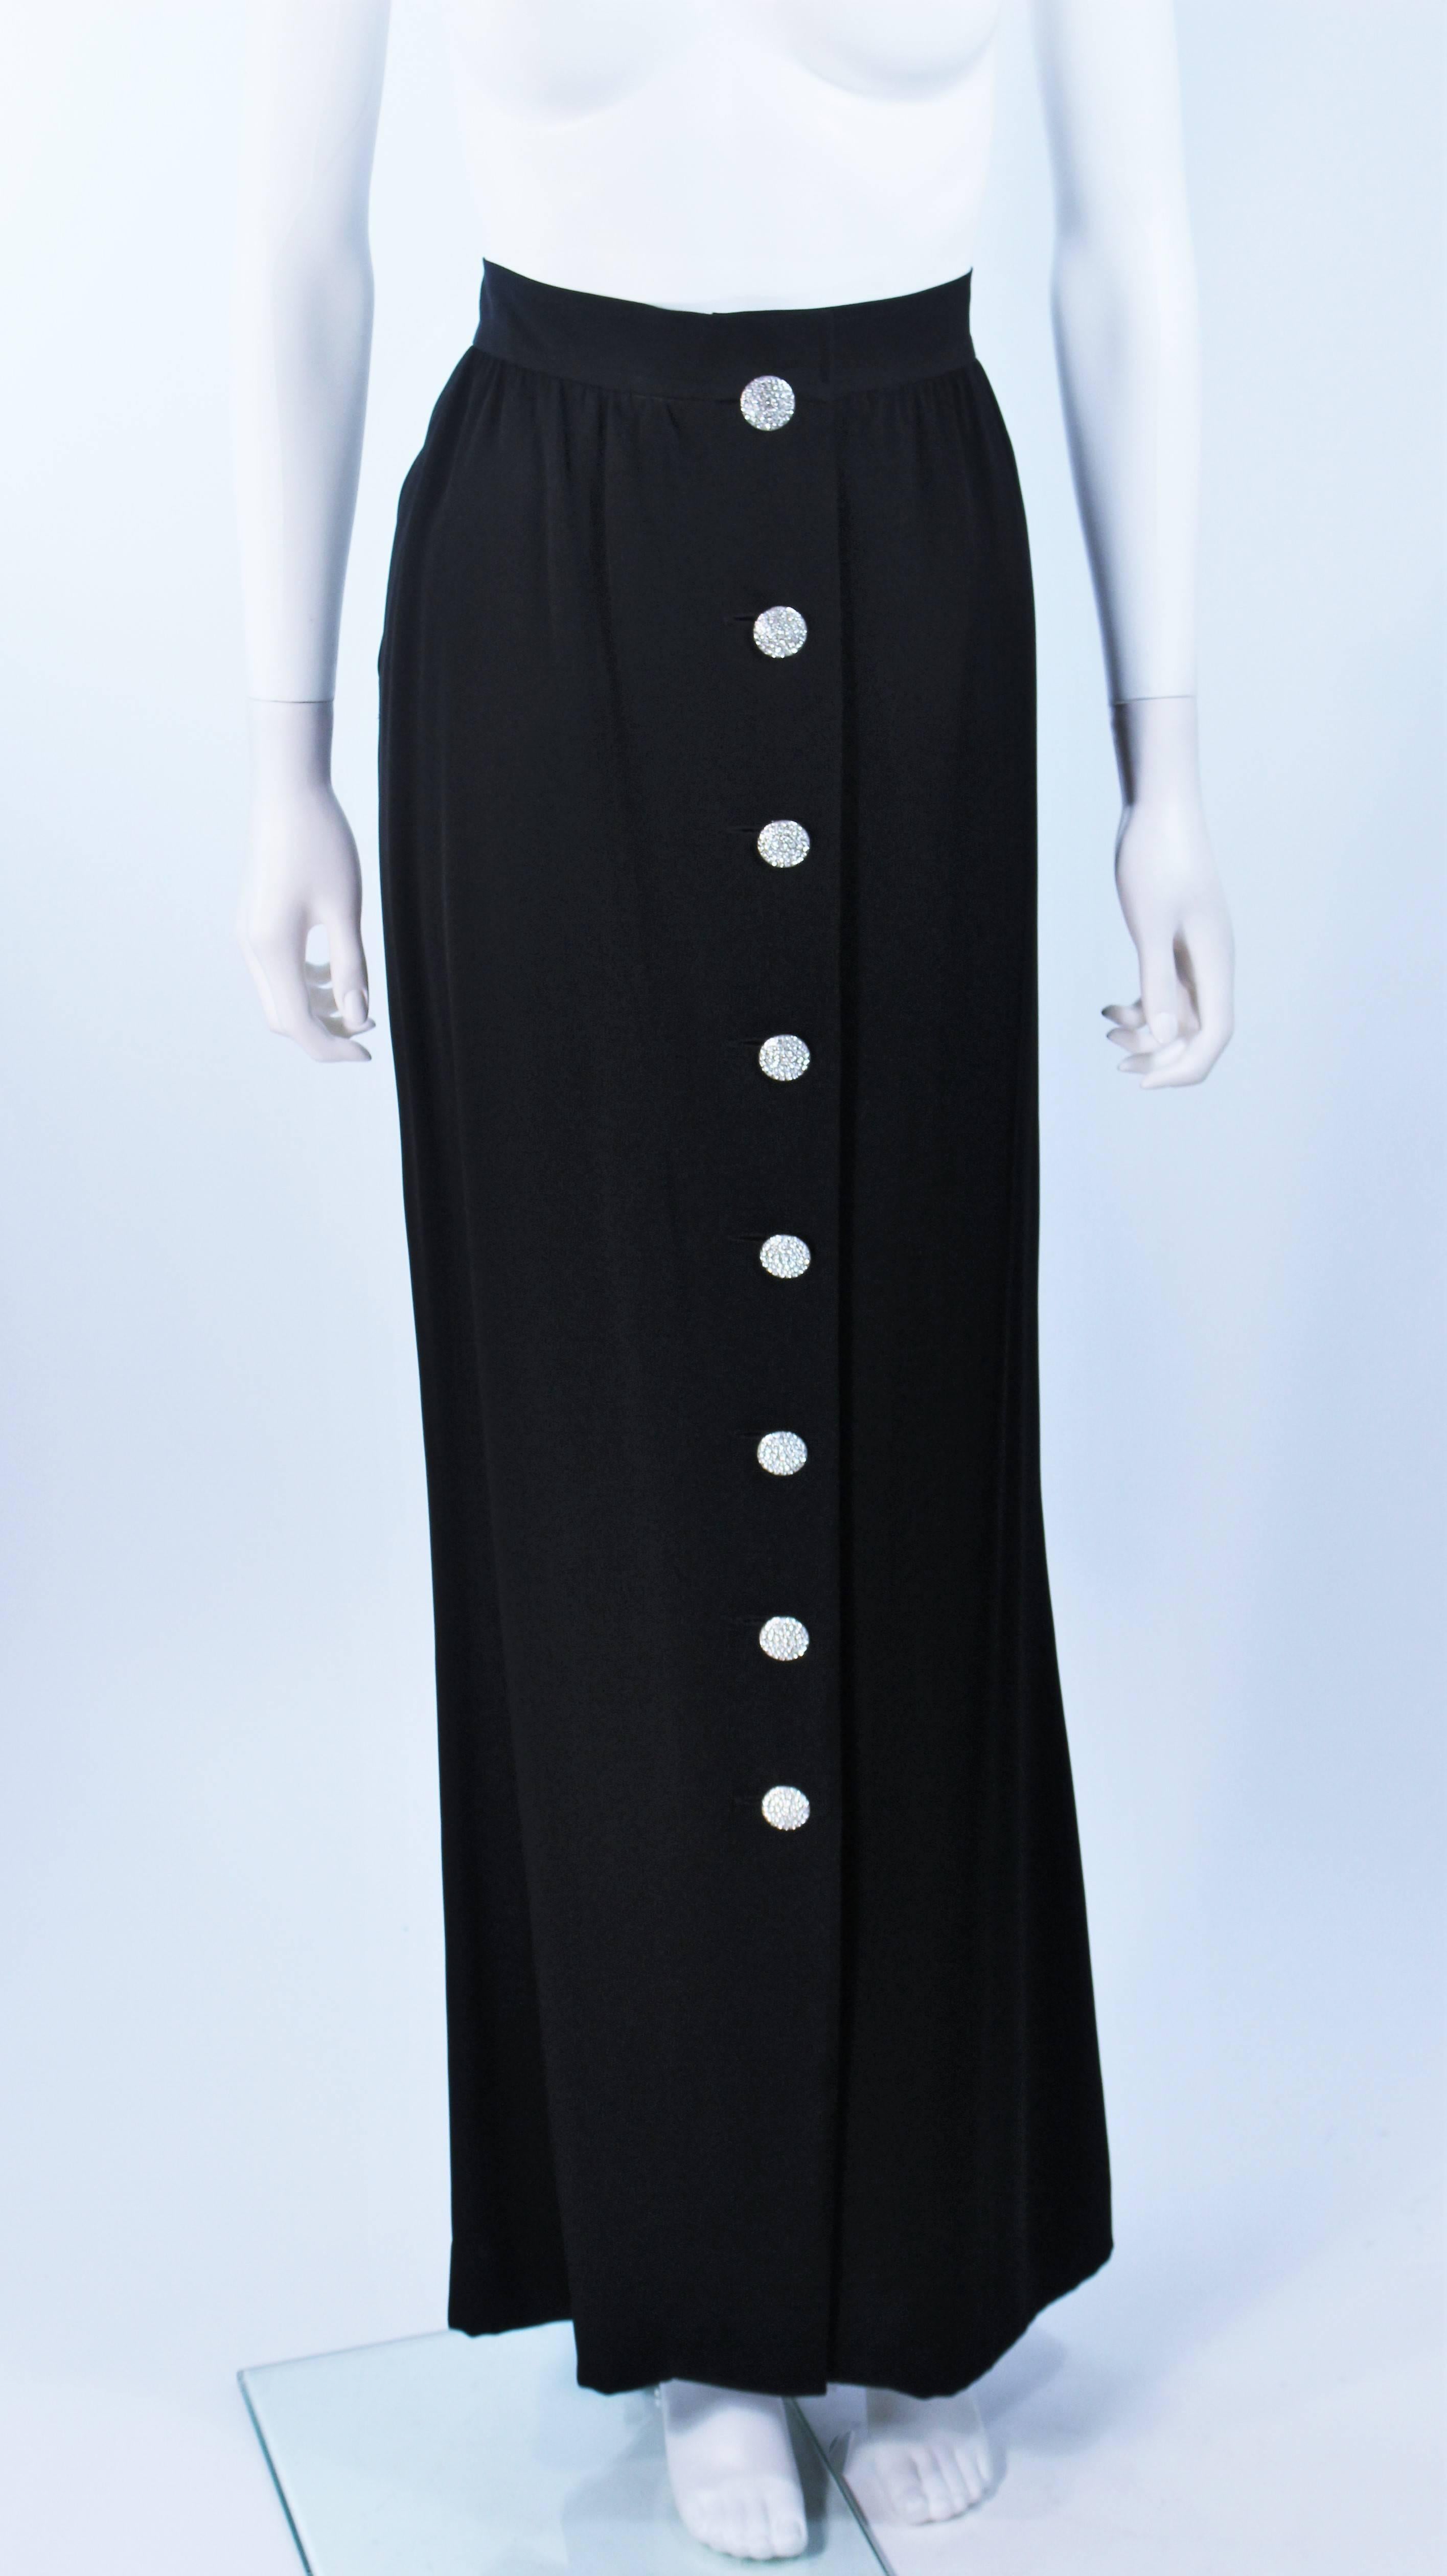 YVES SAINT LAURENT Black Full Length Skirt with Rhinestone Buttons Size 44 In New Condition For Sale In Los Angeles, CA